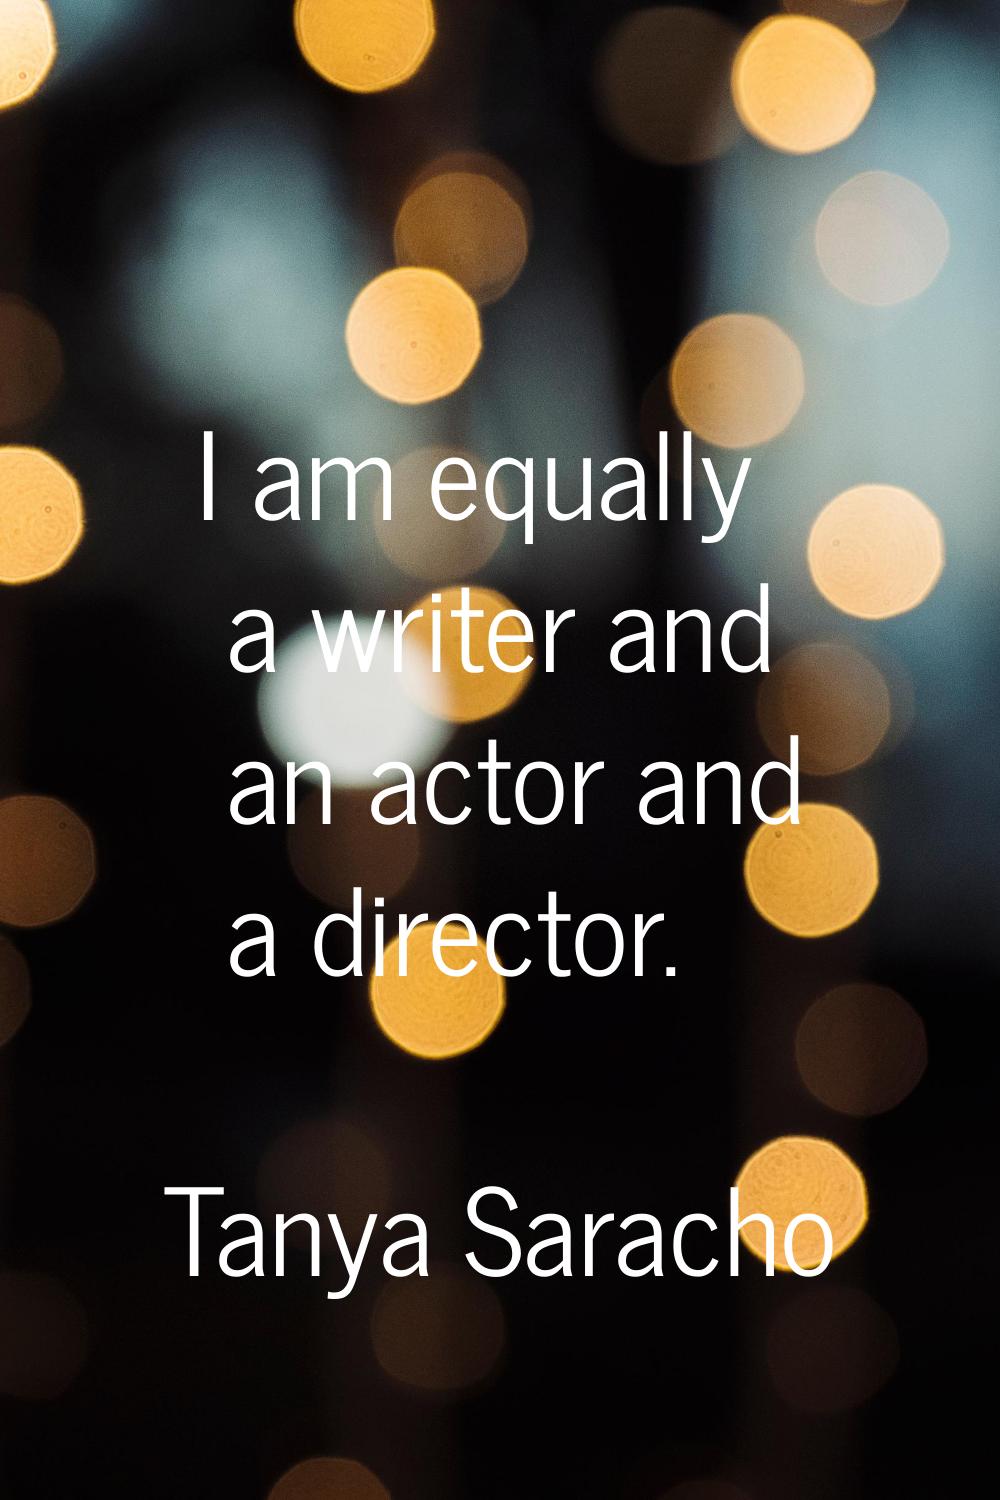 I am equally a writer and an actor and a director.